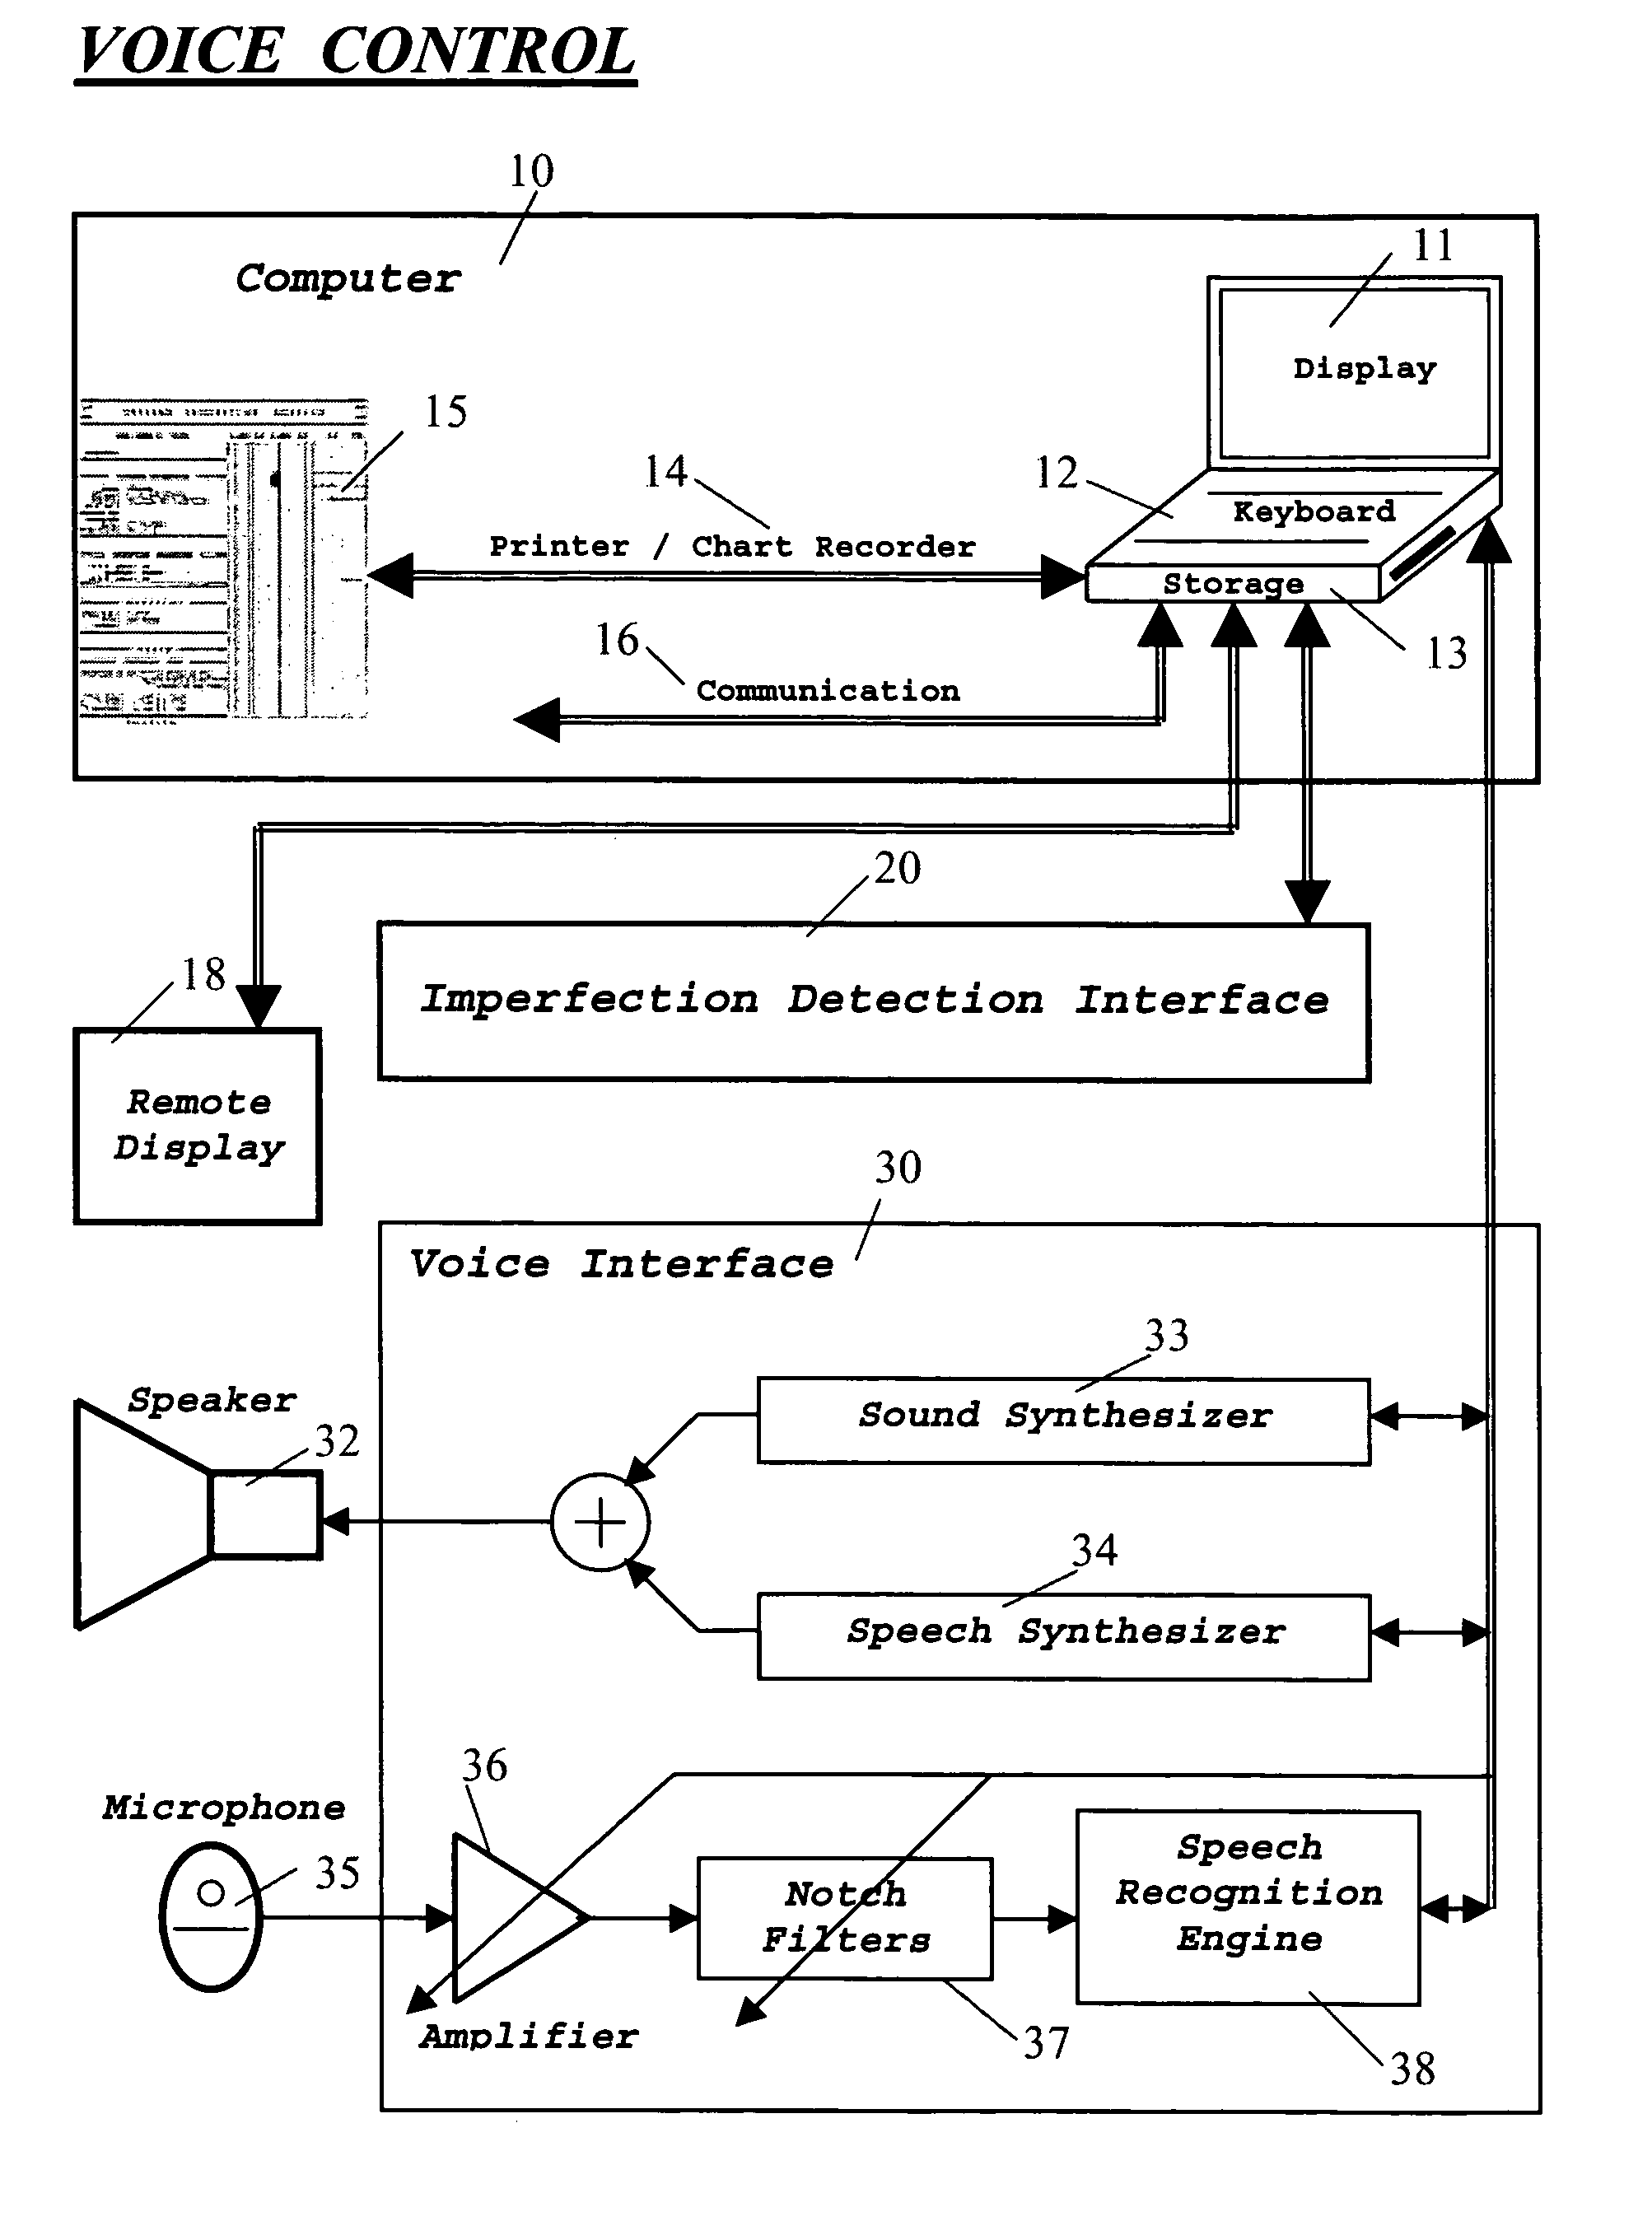 Voice interaction with and control of inspection equipment